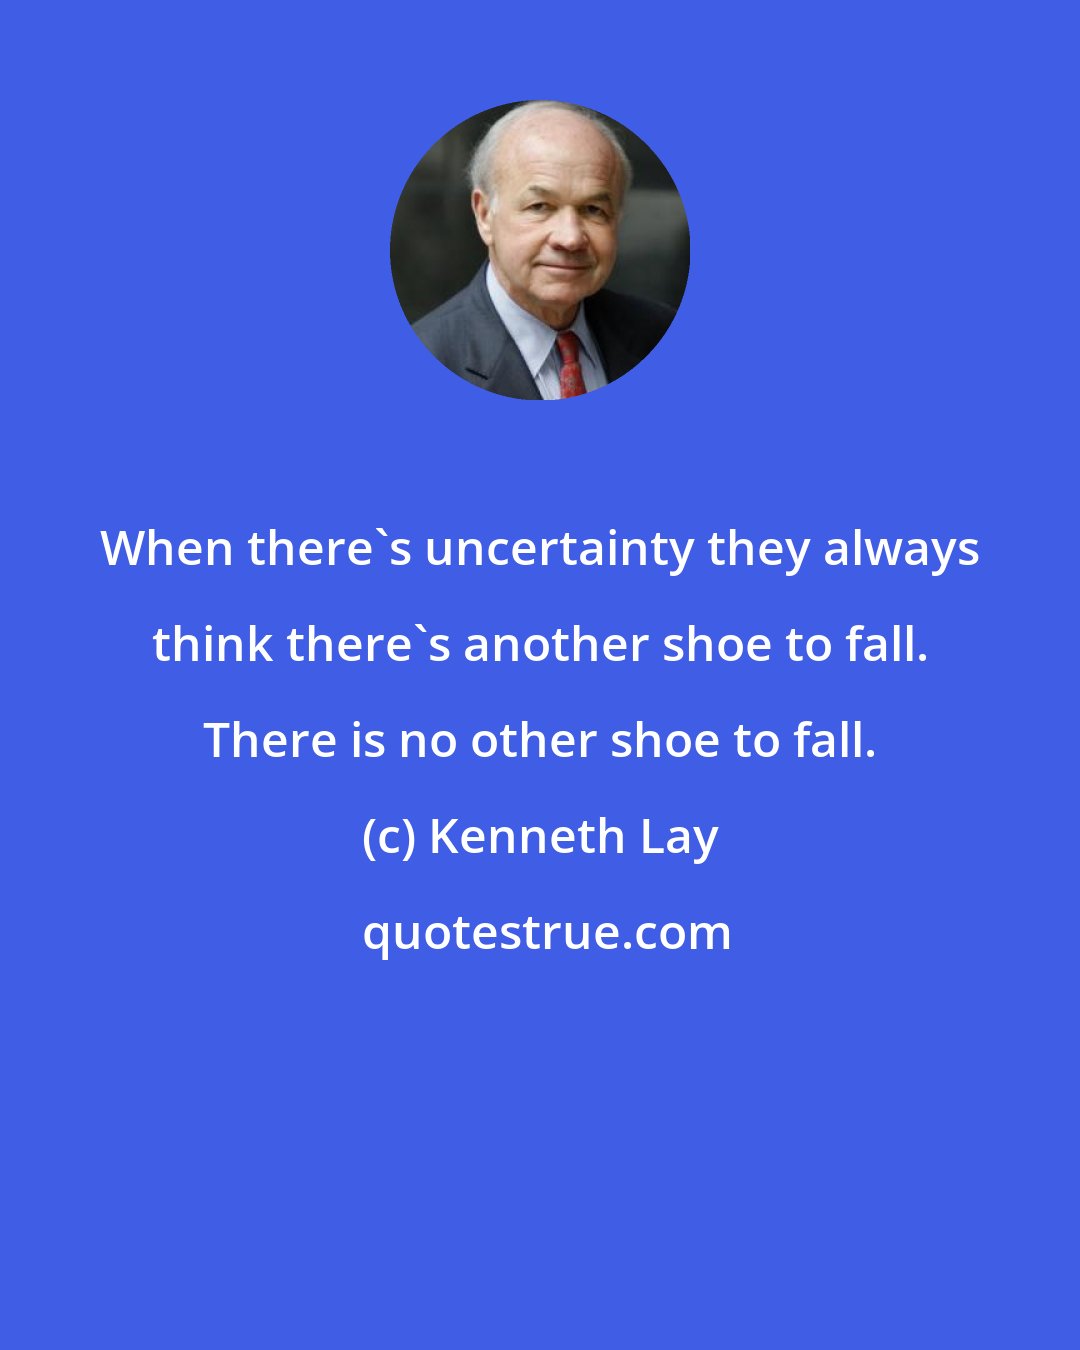 Kenneth Lay: When there's uncertainty they always think there's another shoe to fall. There is no other shoe to fall.